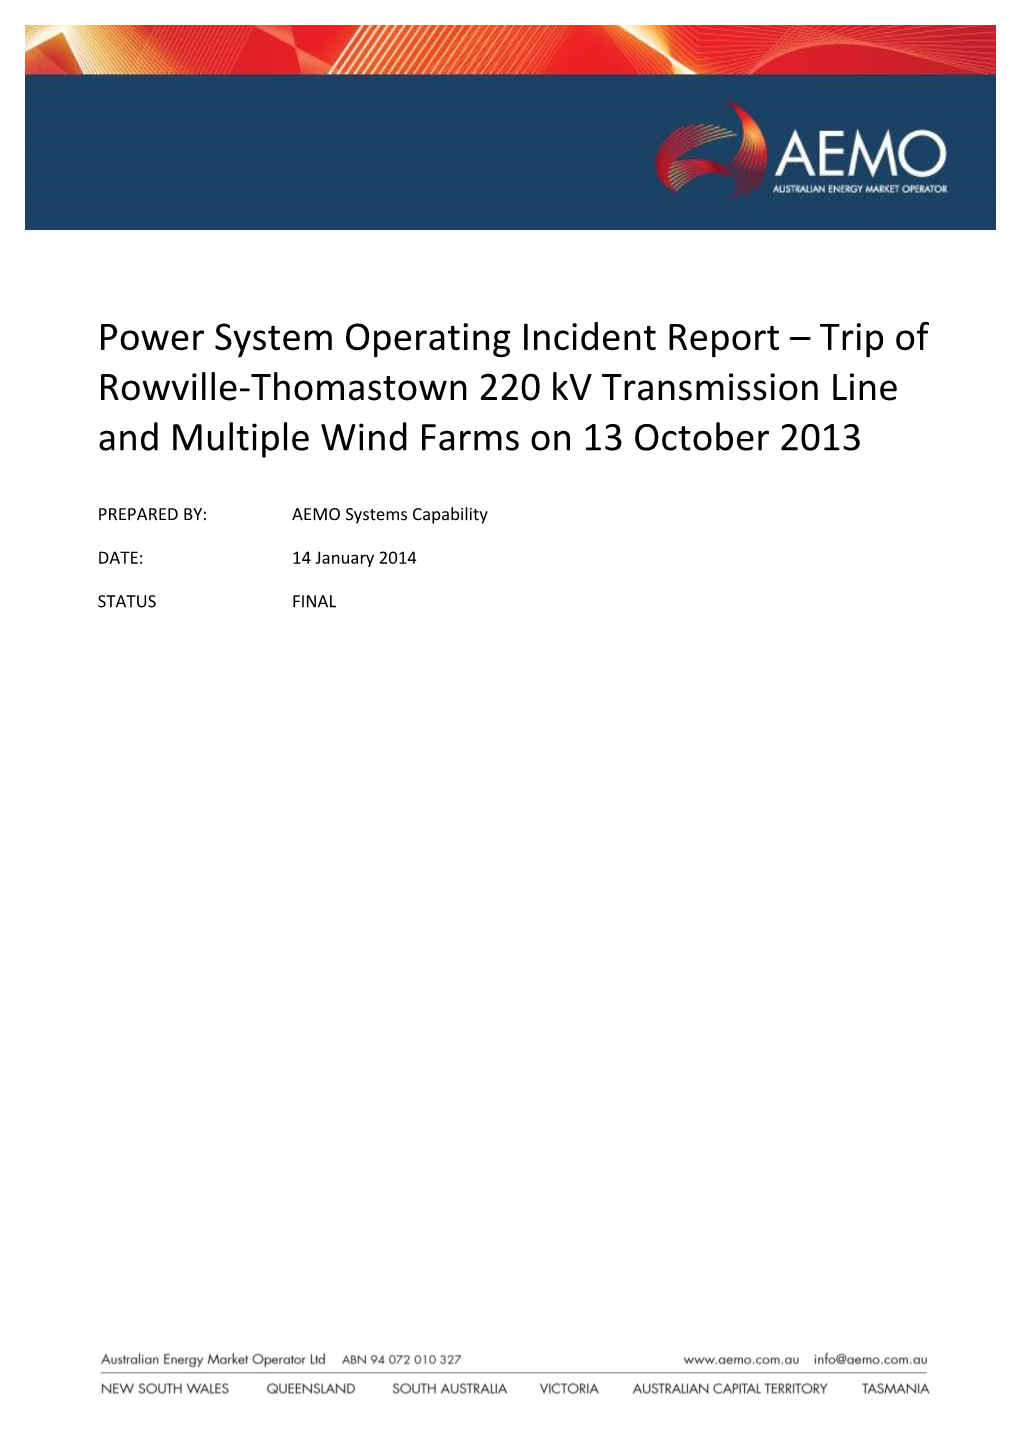 Power System Operating Incident Report – Trip of Rowville-Thomastown 220 Kv Transmission Line and Multiple Wind Farms on 13 October 2013